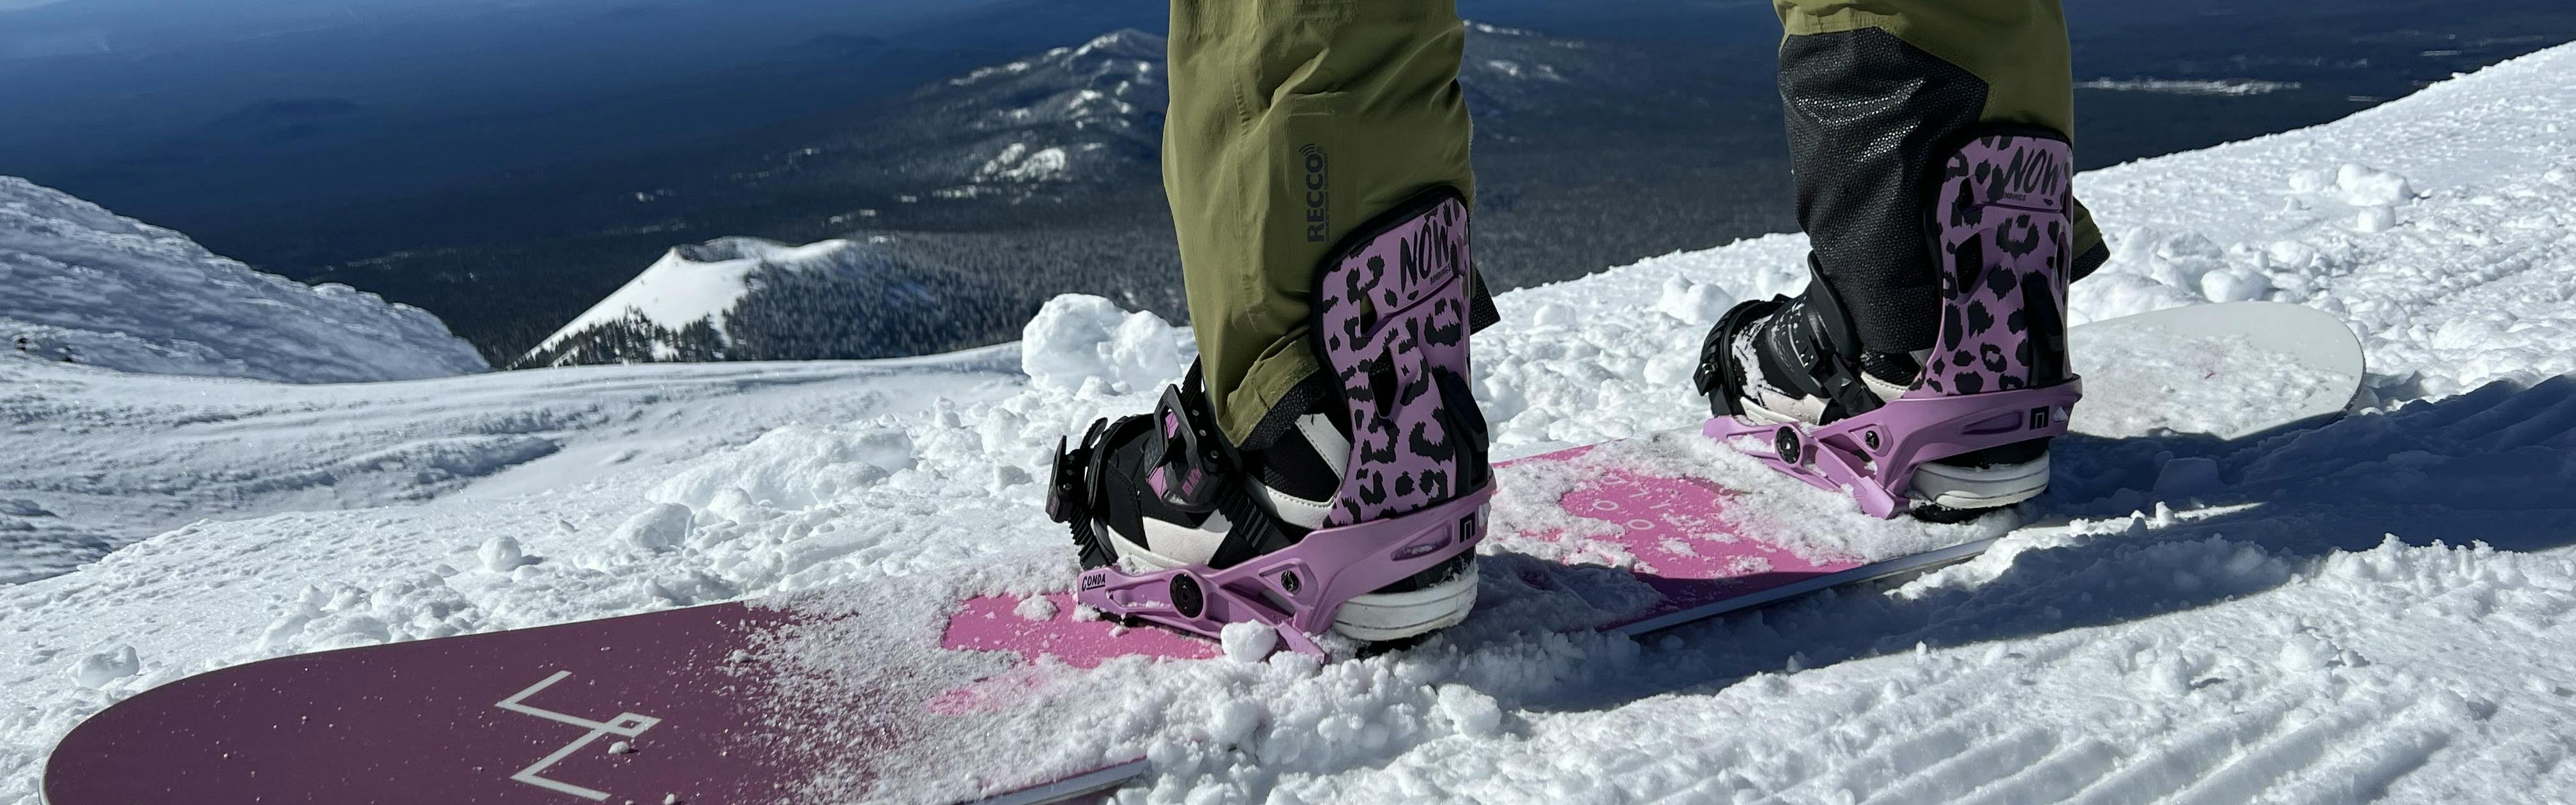 Getting ready to drop in at Mt Bachelor with the NOW CONDA bindings.